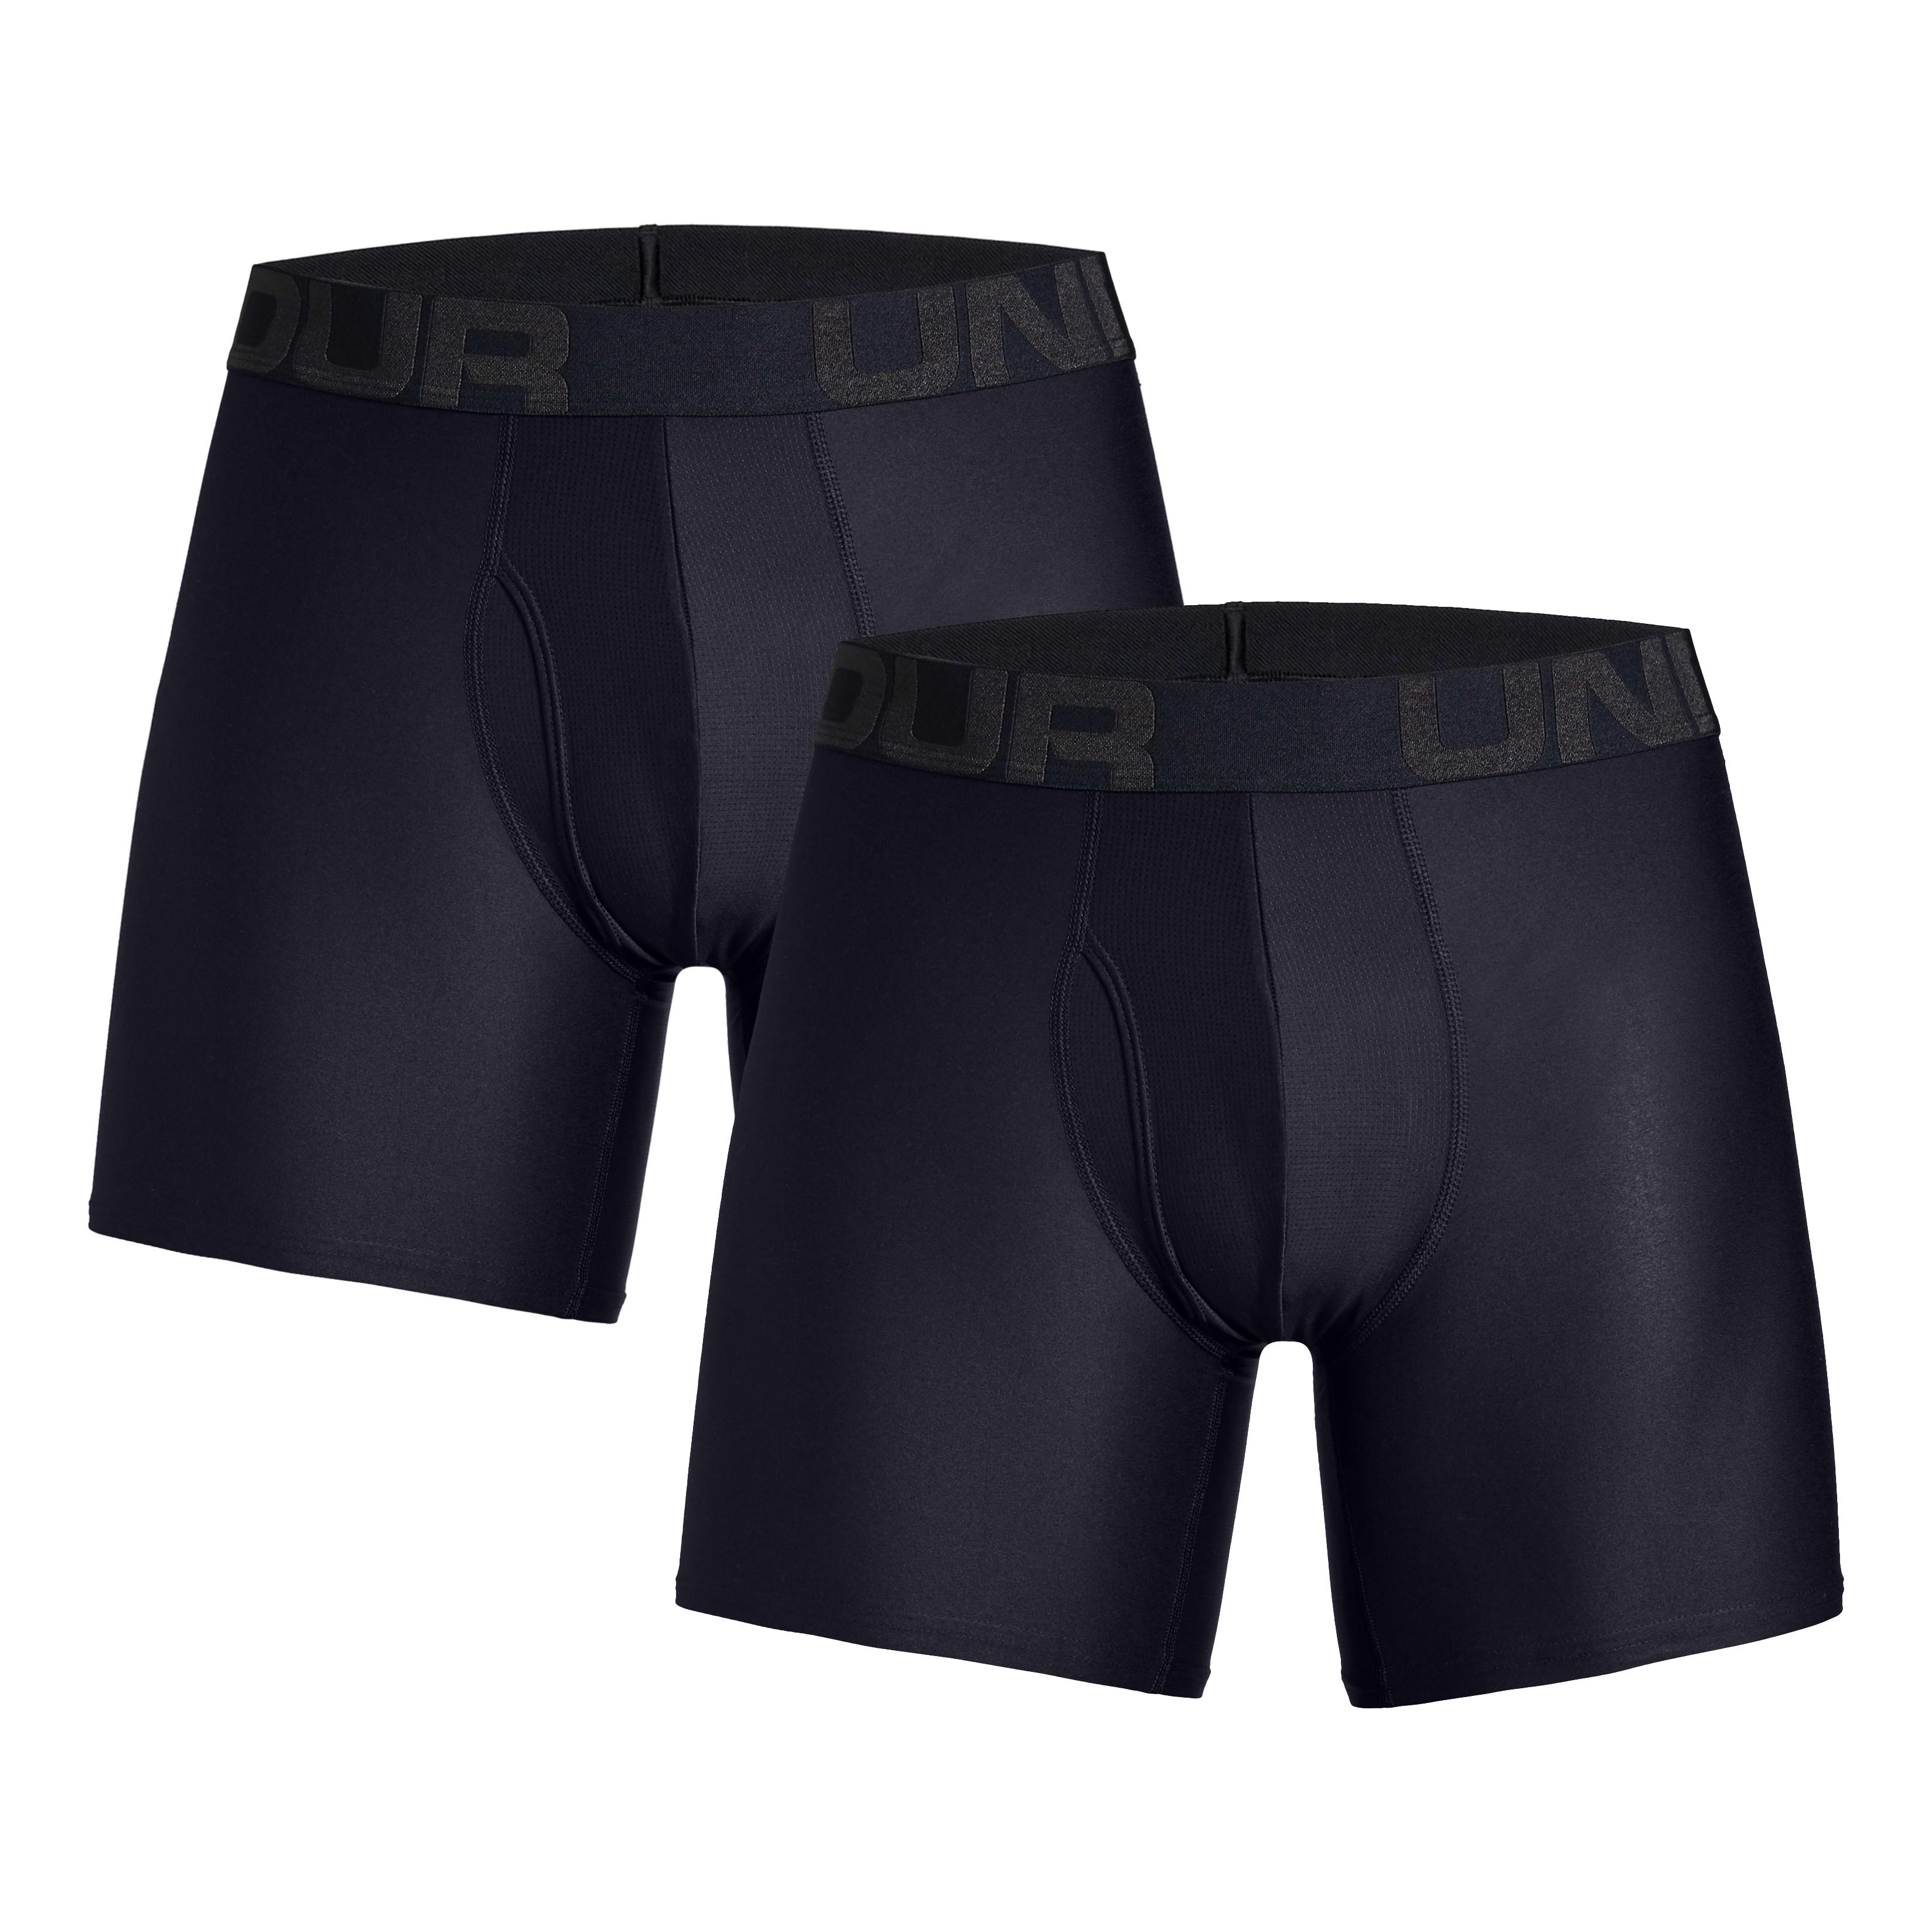 SAXX® Ultra Boxer with Fly